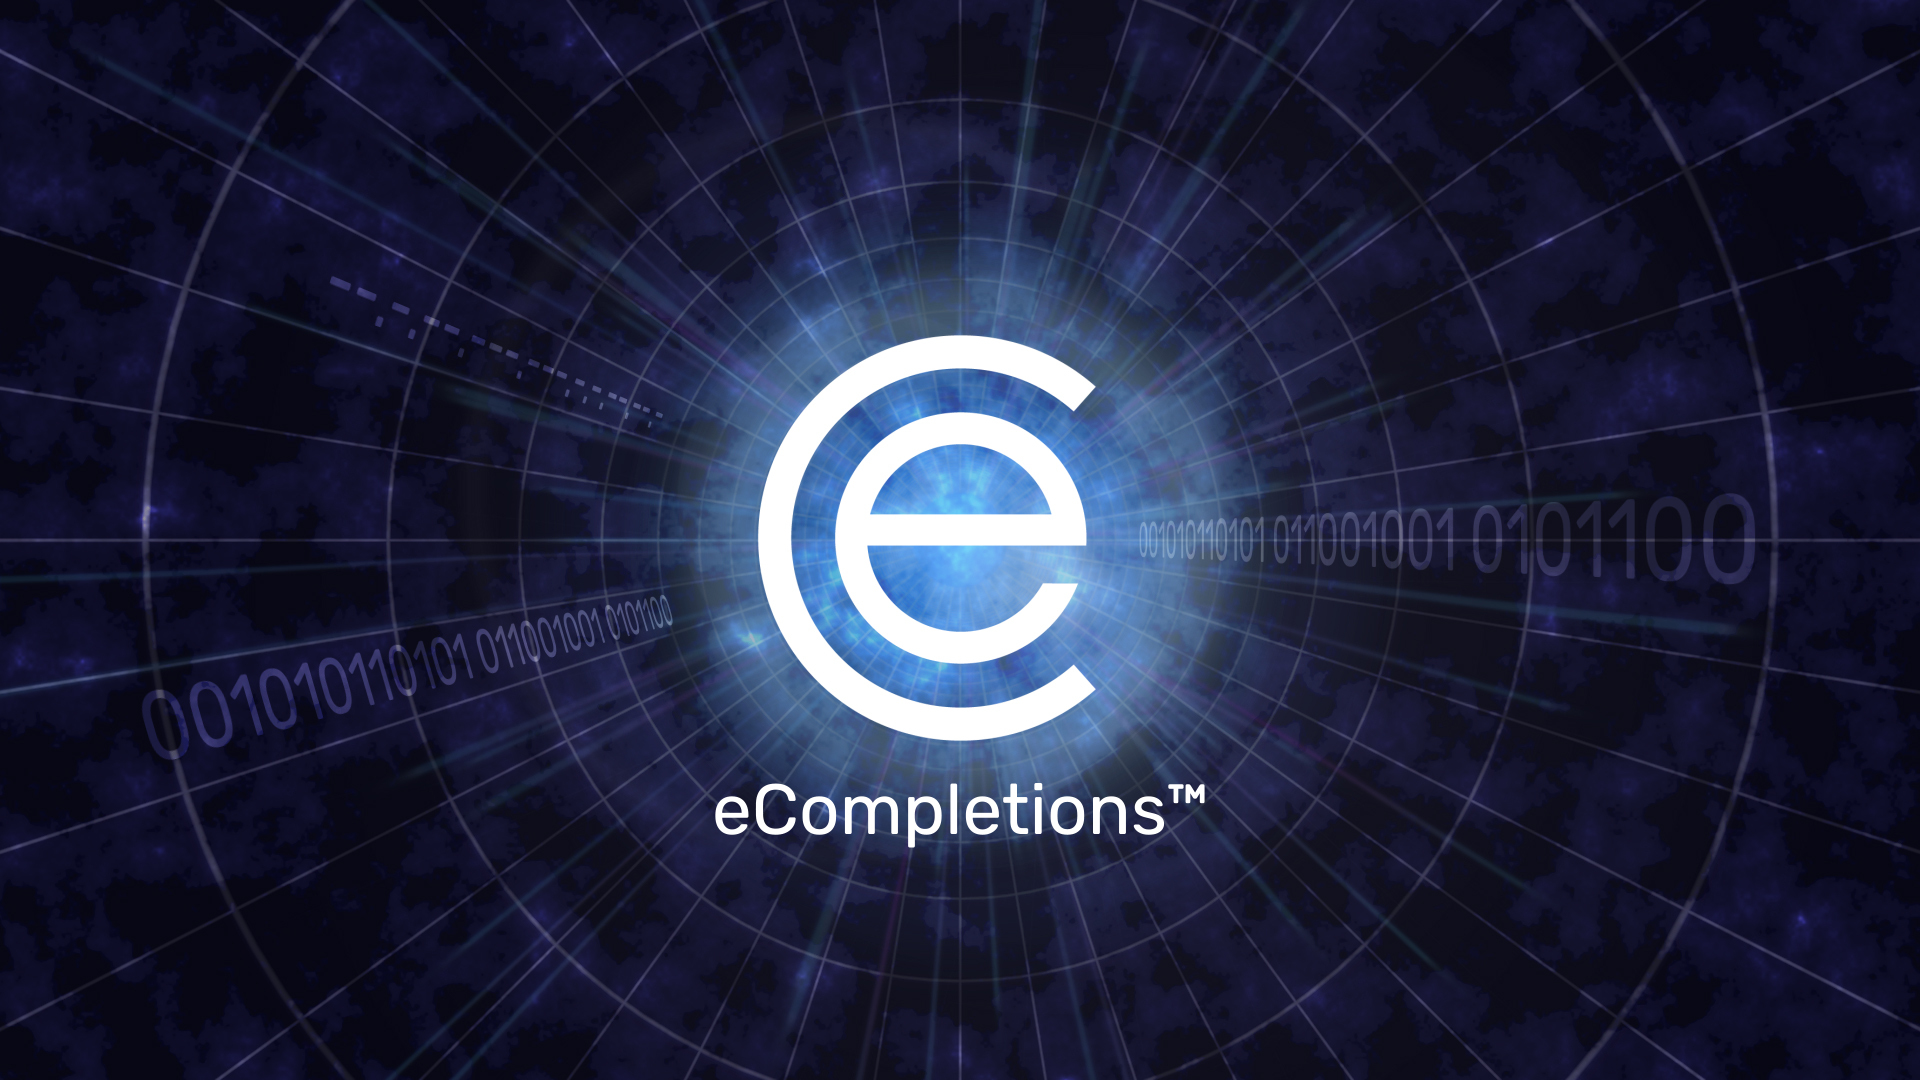 The Future of Completions®